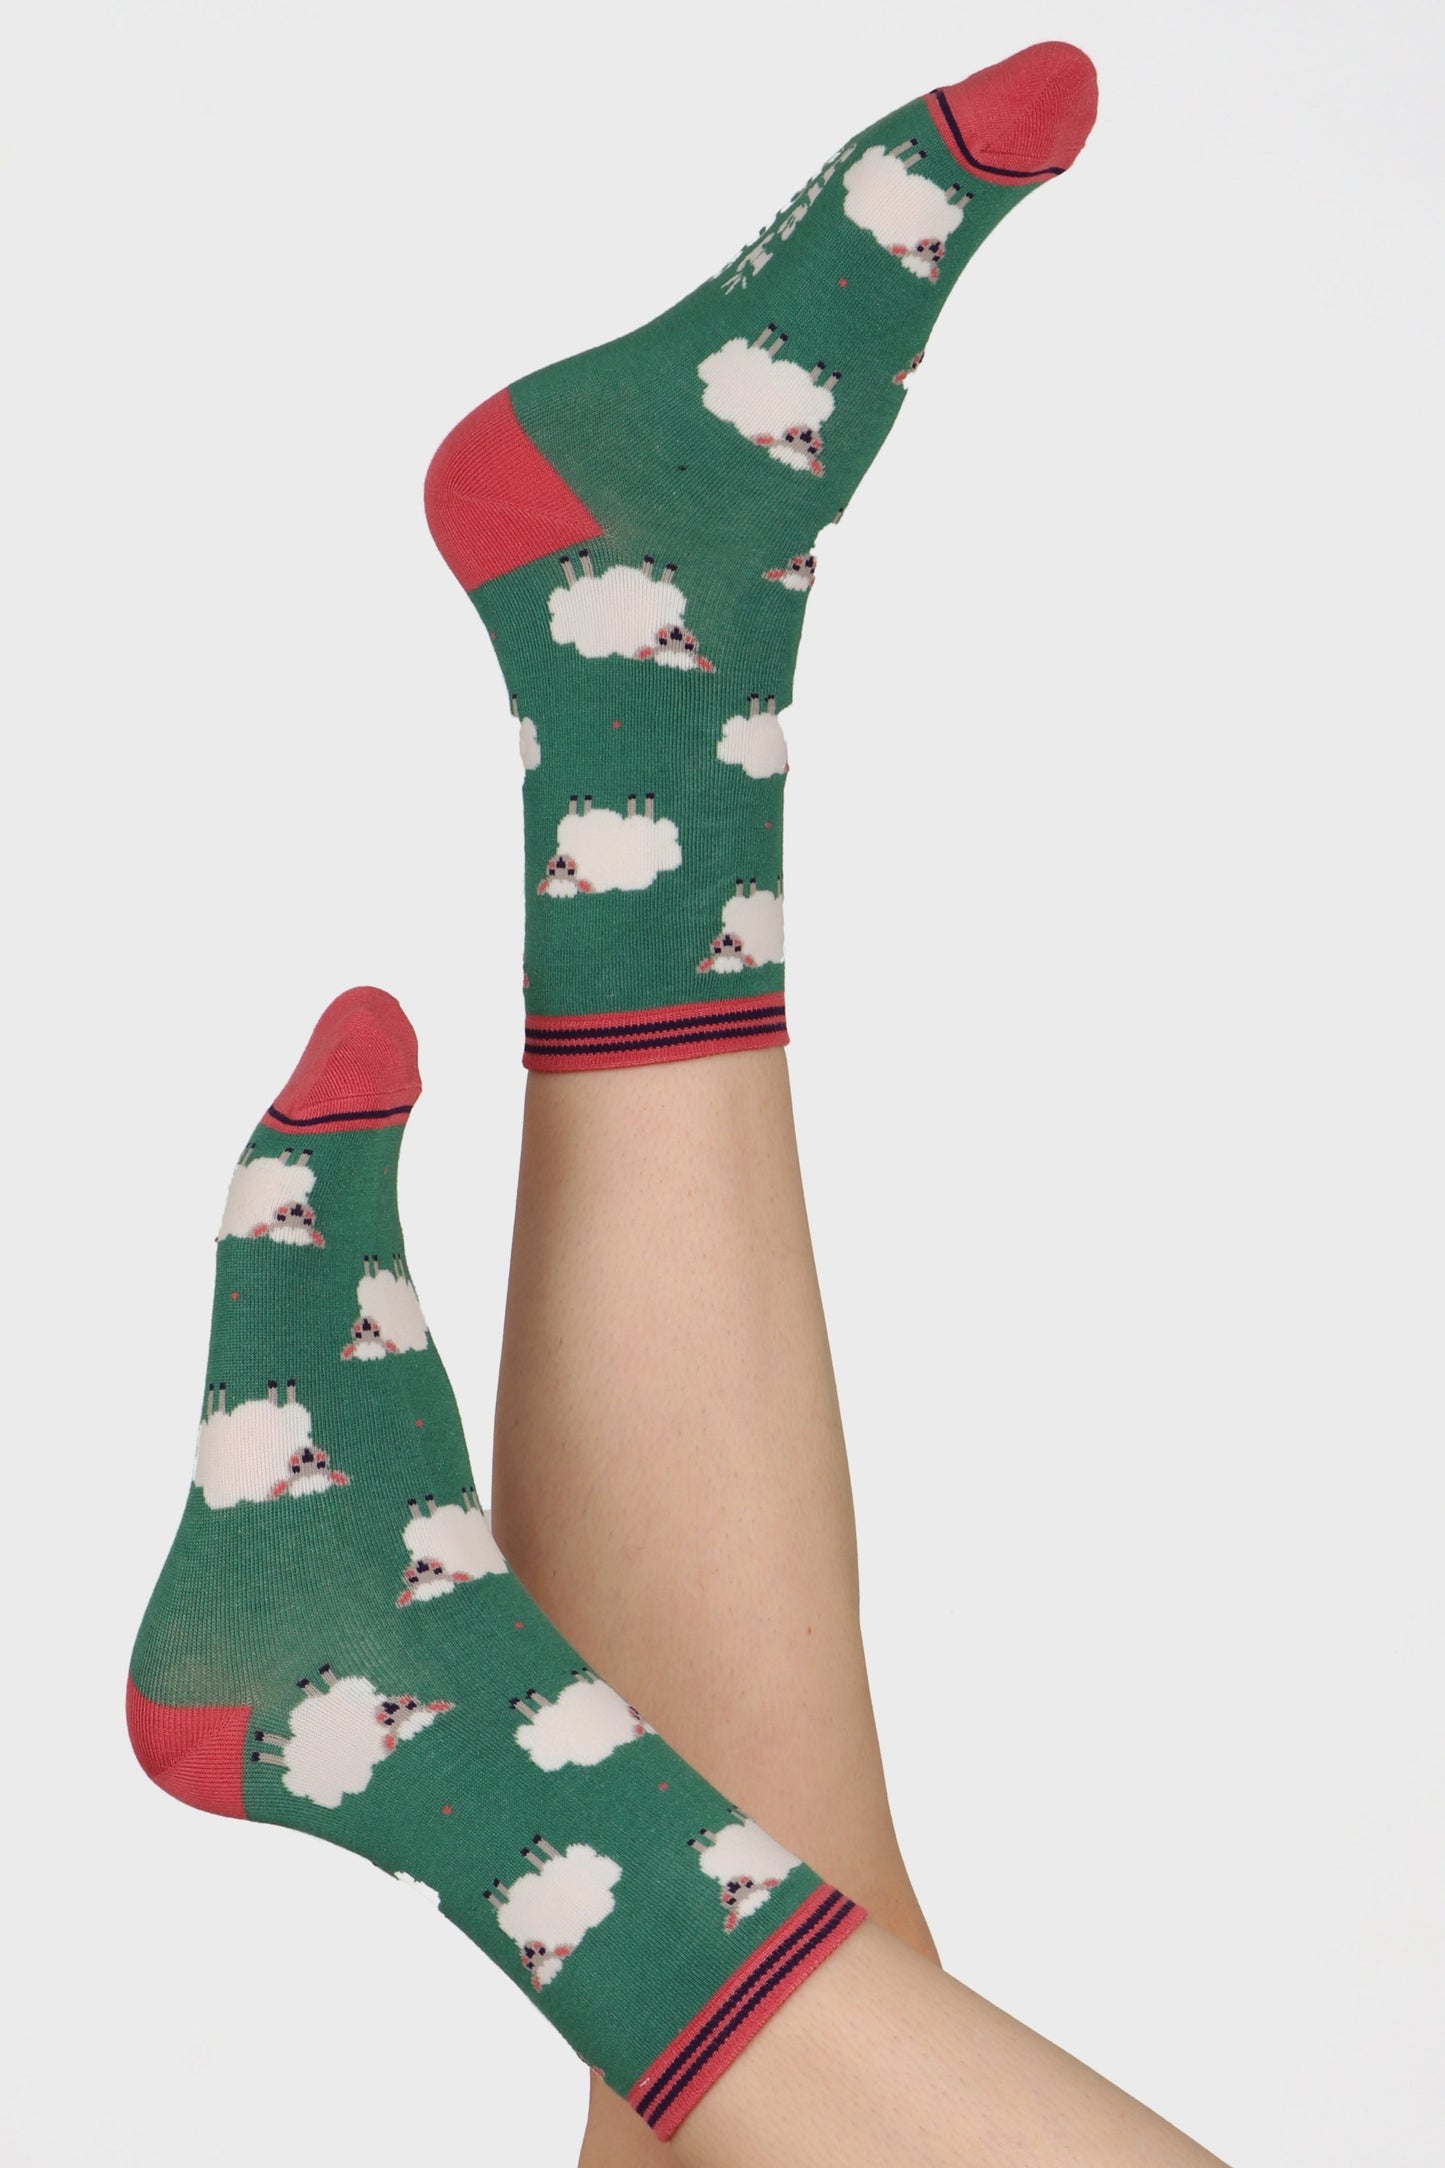 Ladies feet posed in the air wearing green base socks with spring sheep print. Contrasting heel toe and cuff in pink can be seen